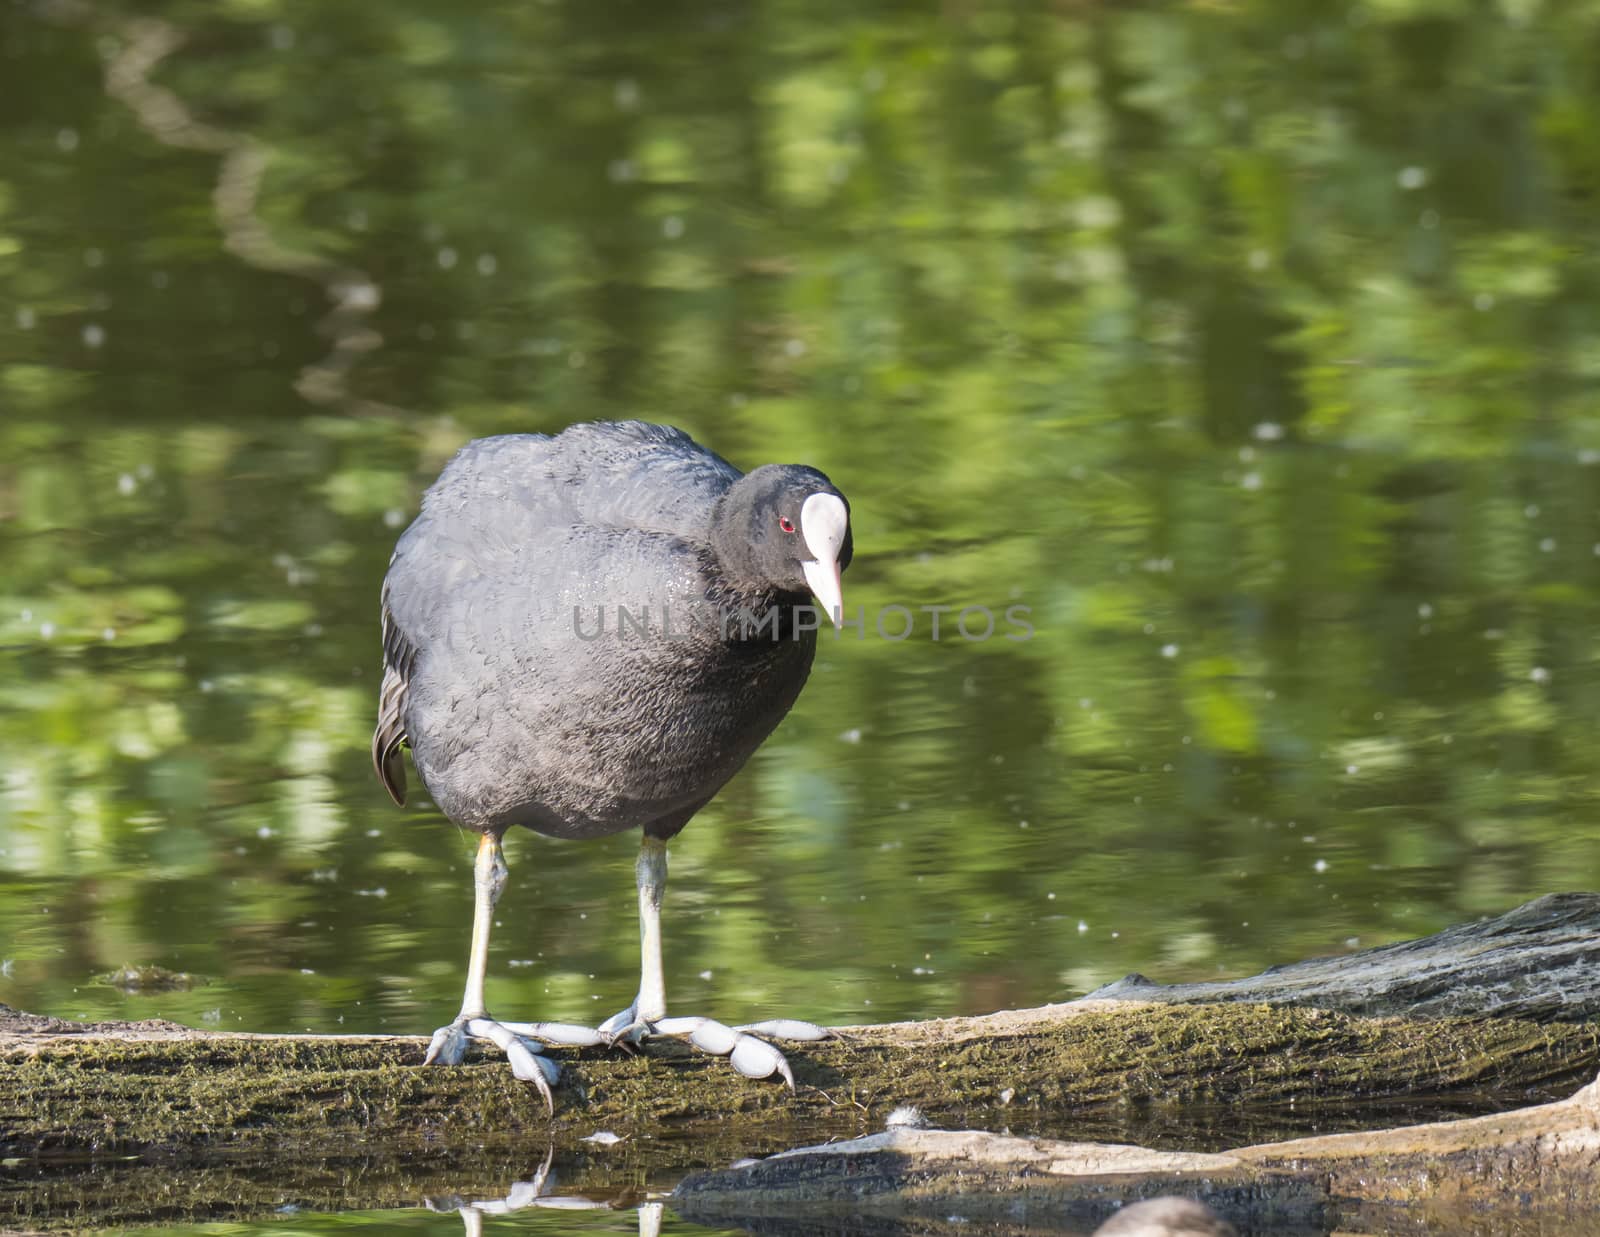 Close up portrait of Eurasian coot Fulica atra, also known as the common coot standing on tree log in water of green pond, selective focus, copy space by Henkeova